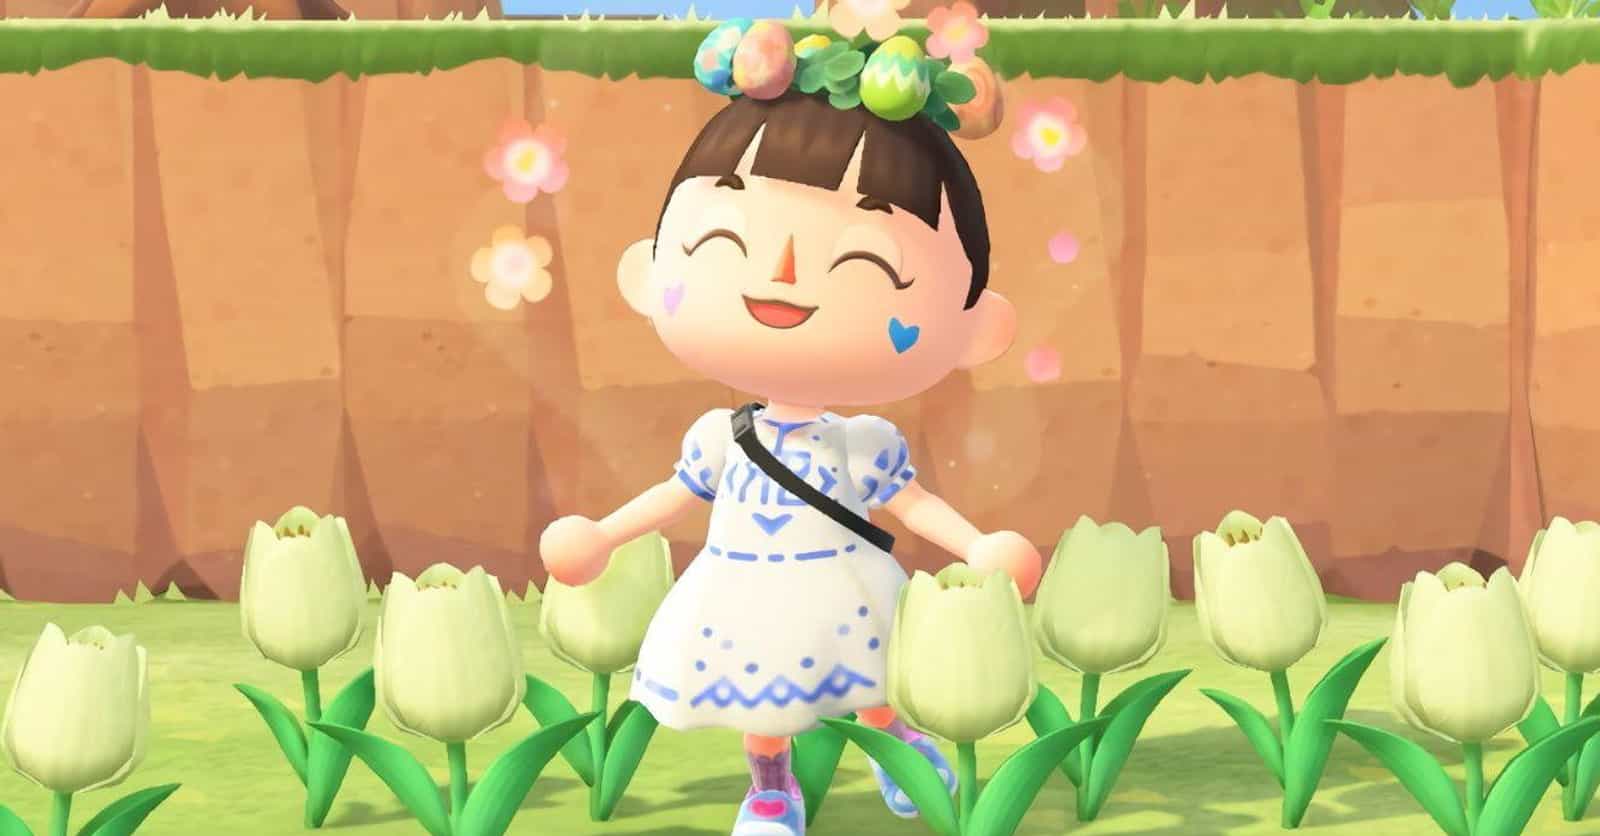 30 Dazzling Dress Designs For 'Animal Crossing: New Horizons'